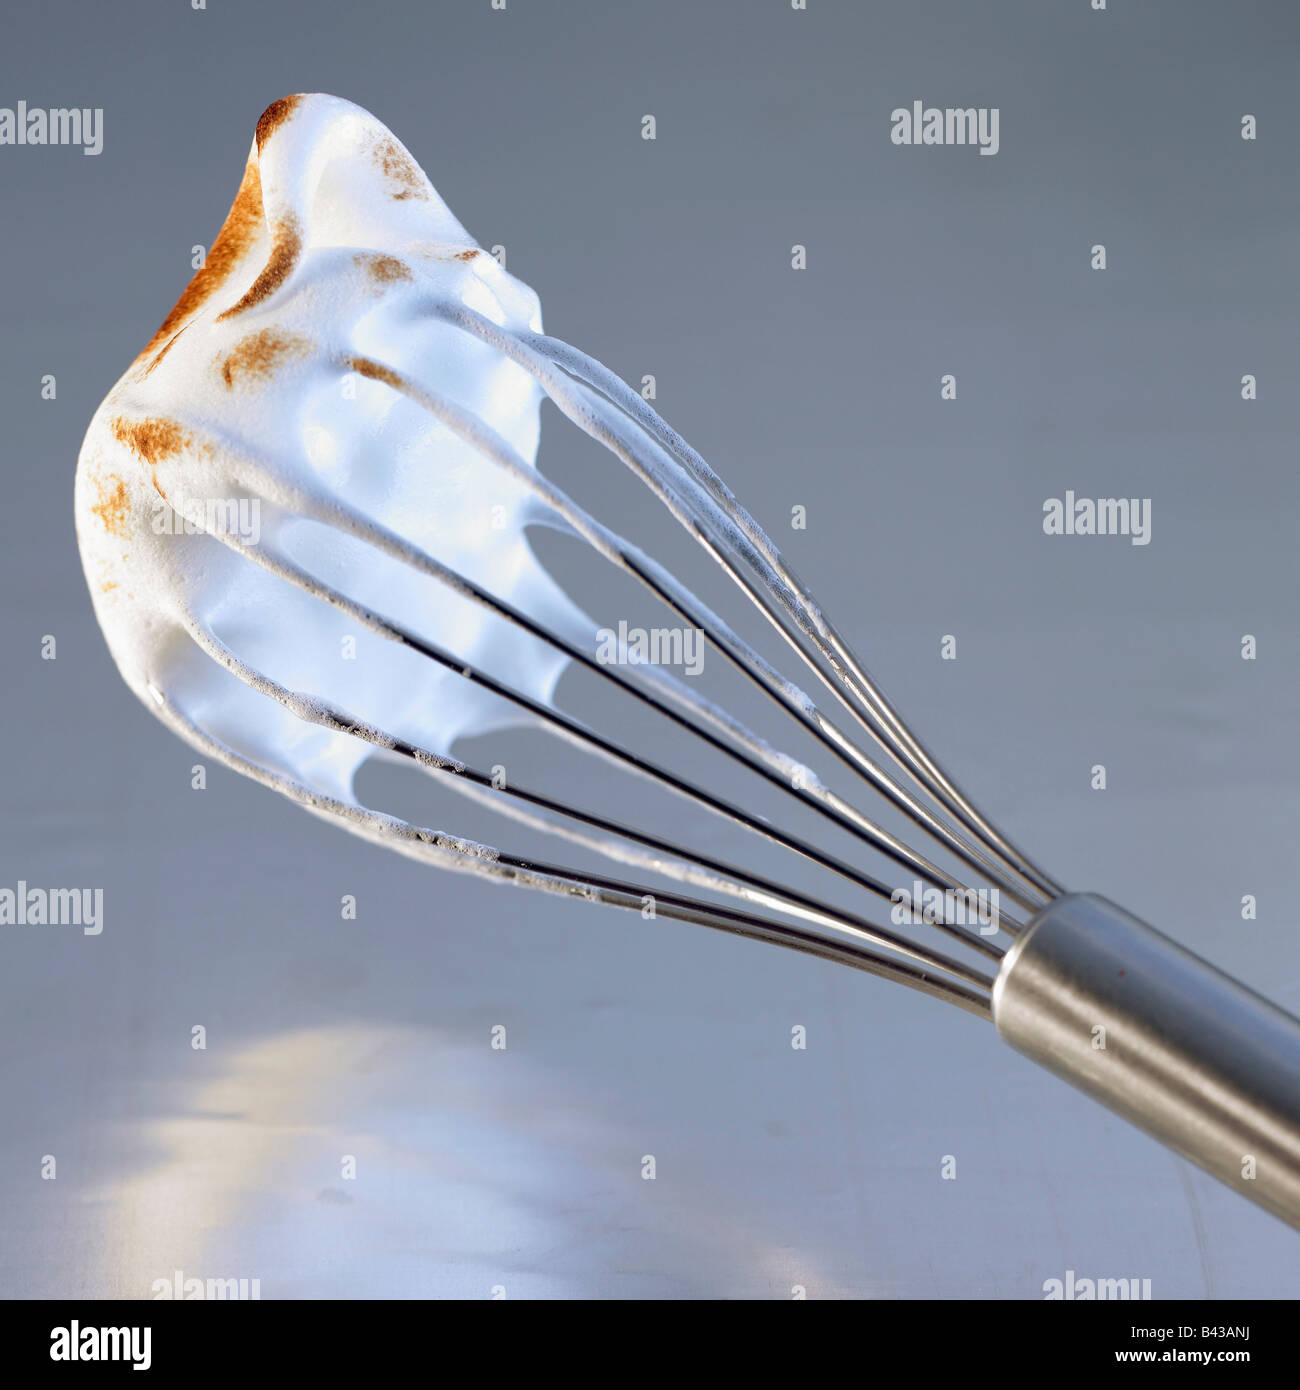 Grilled meringue on a whisk Stock Photo